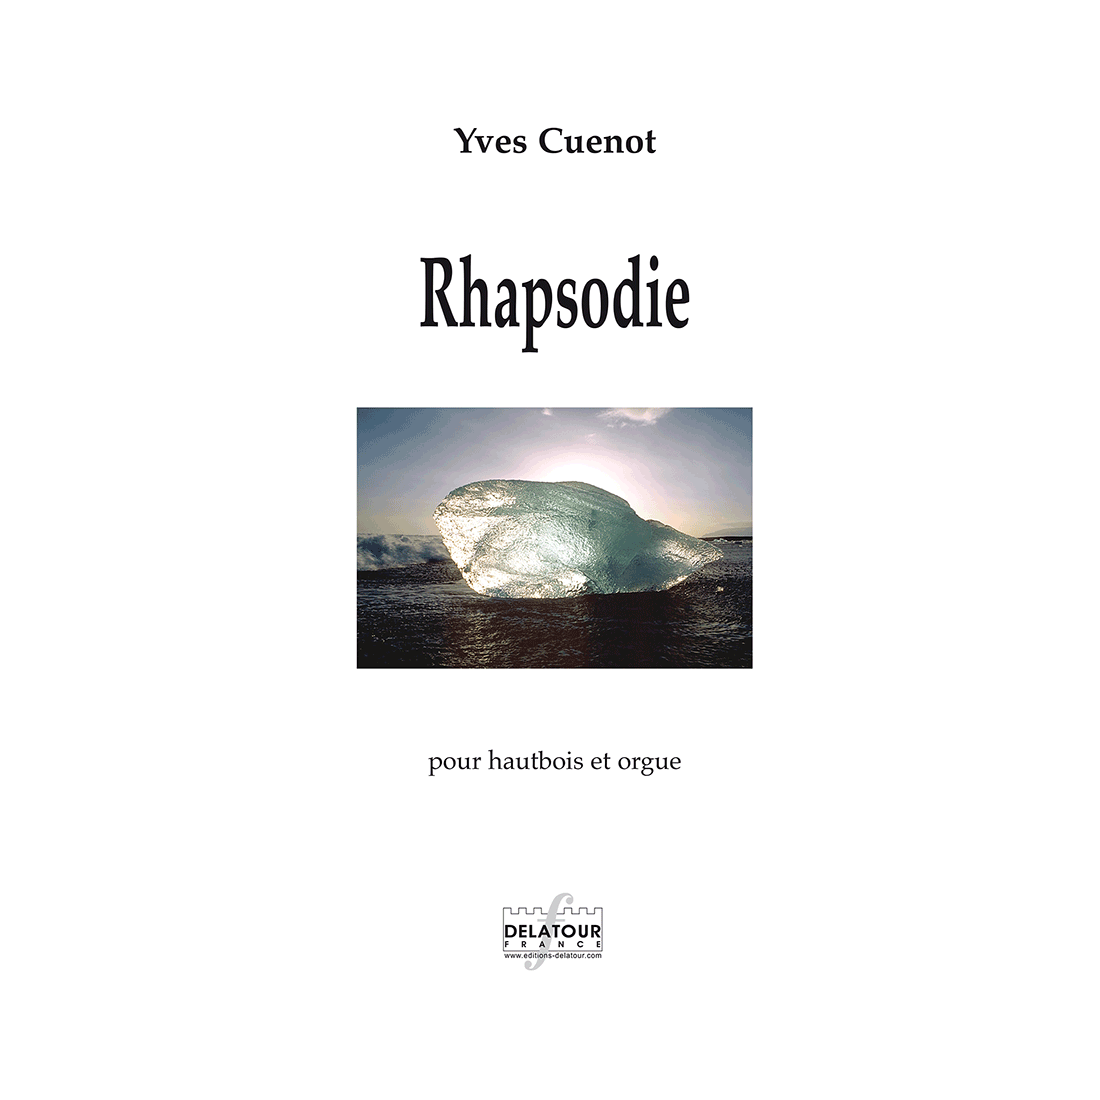 Rhapsodie for oboe and organ